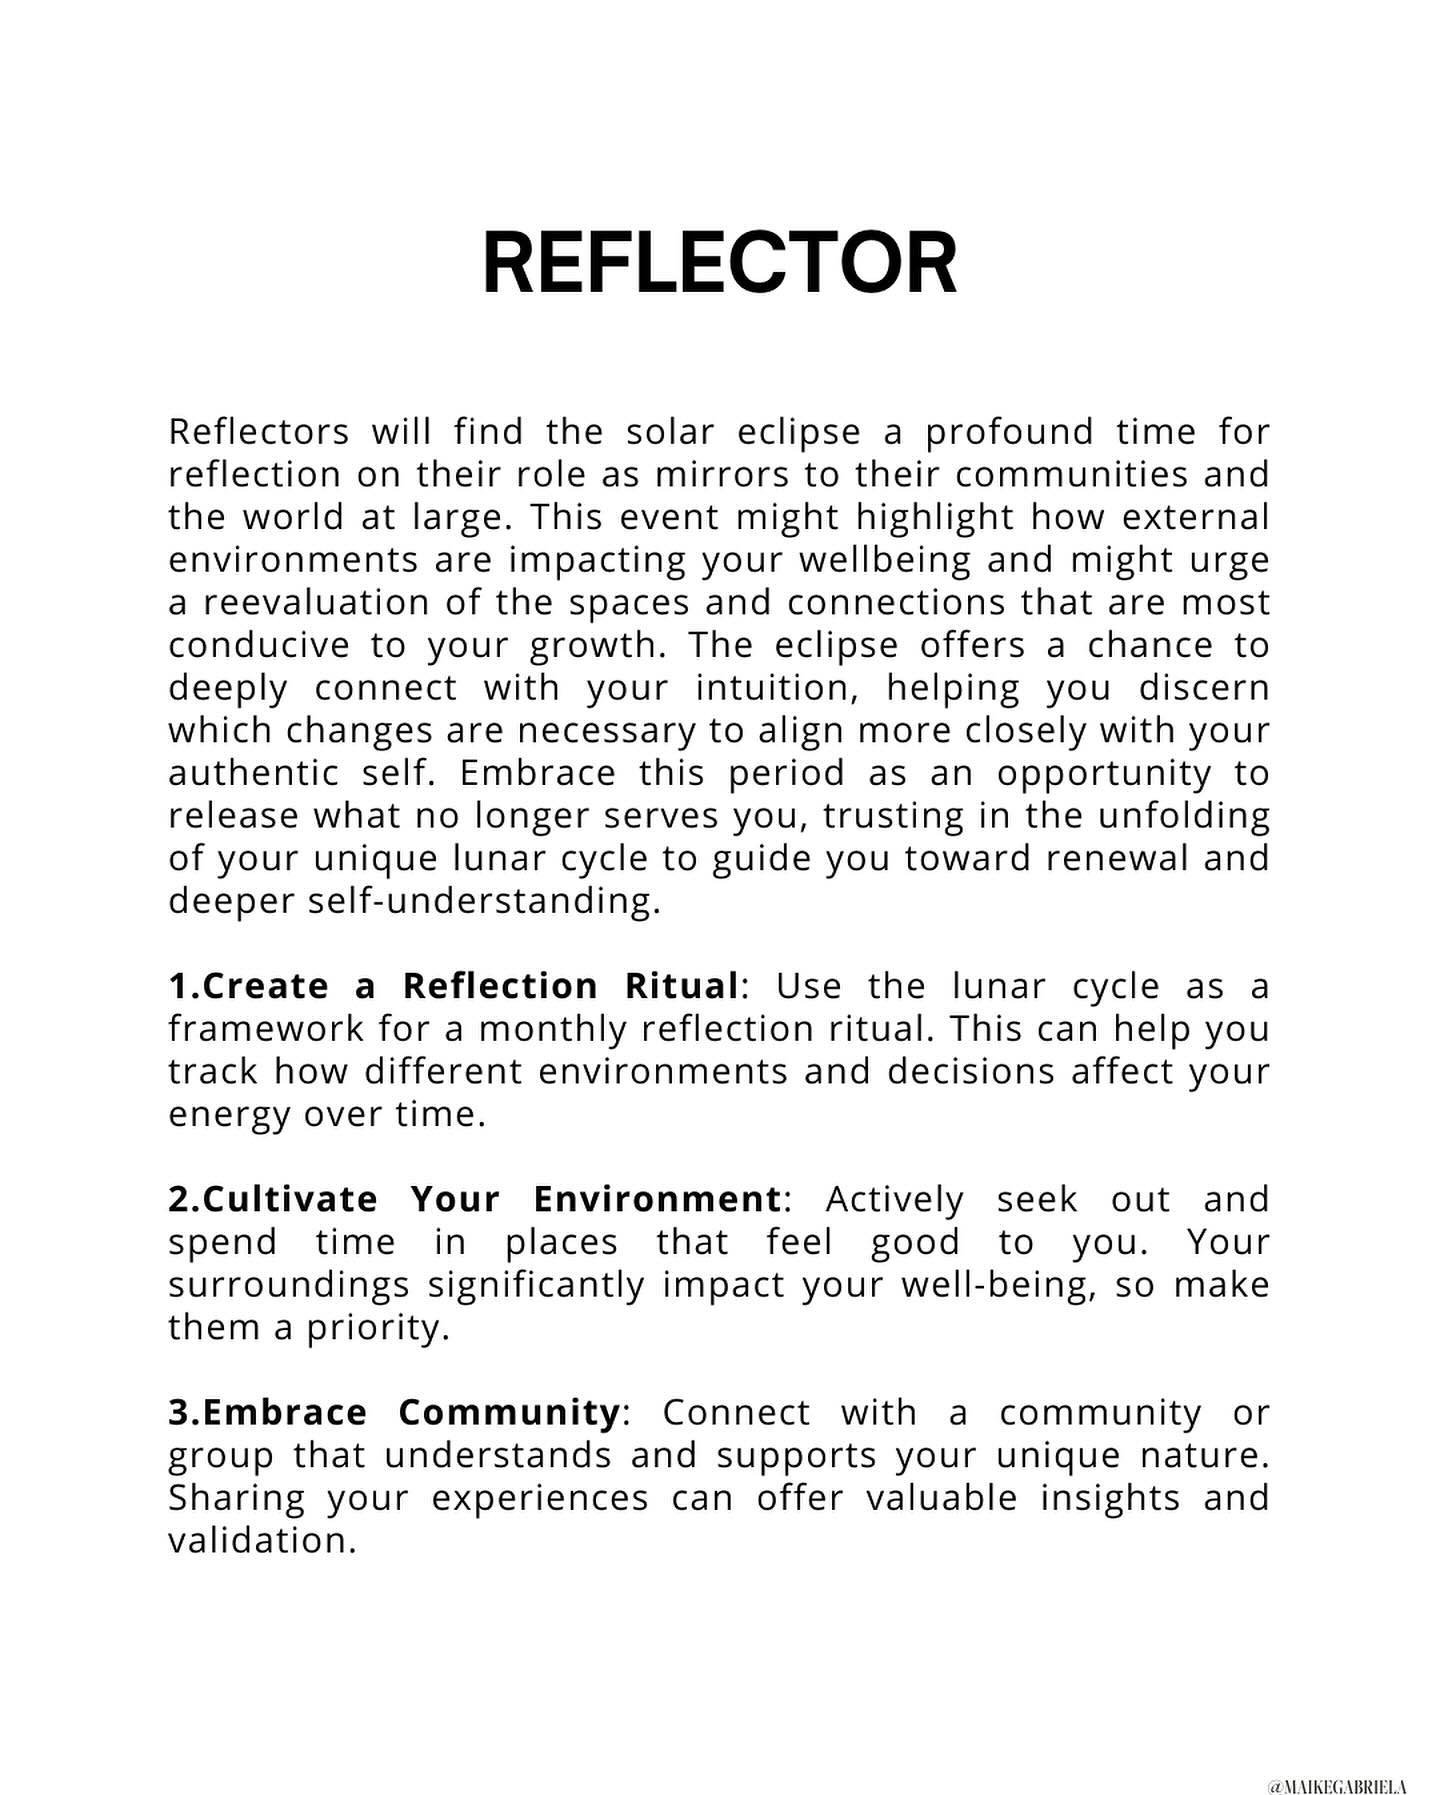 3 Actionable Steps To Uplevel During The Solar Eclipse.

Let me know in the comments if this resonates.

#humandesign #manifestor #generator #reflector #projector #manifestinggenerator #newparadigm #solareclipse